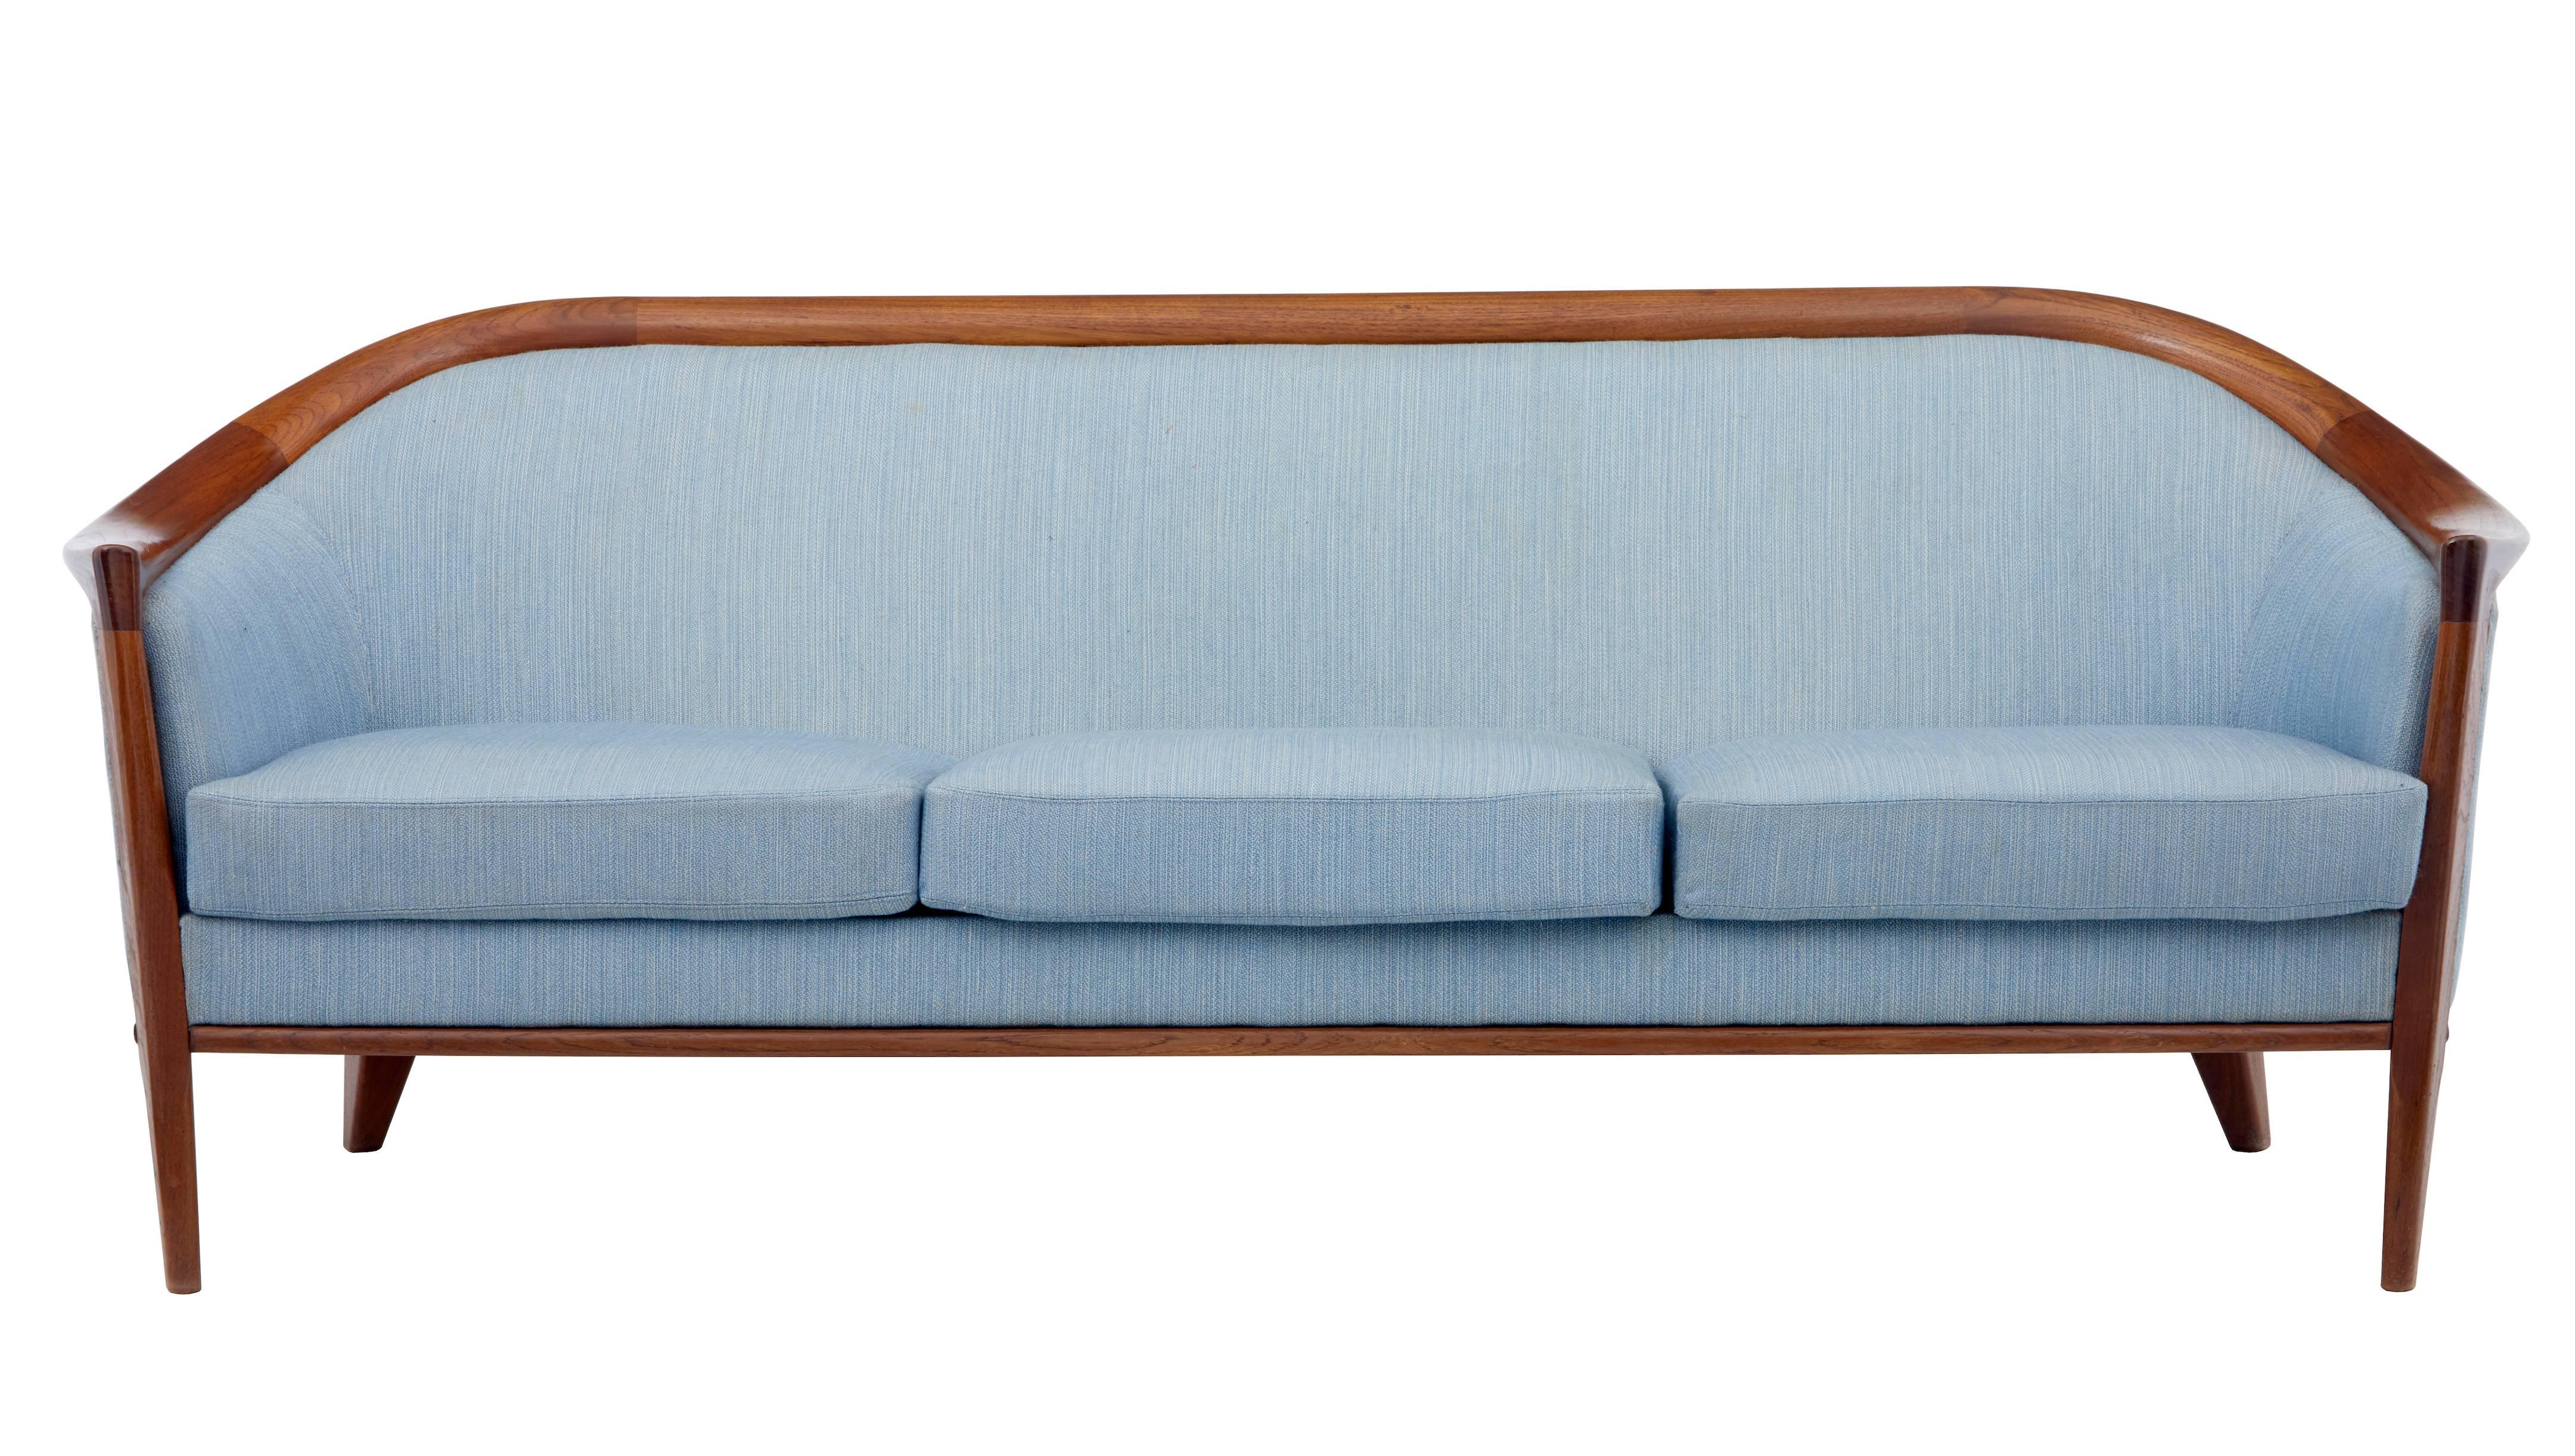 Classic piece of 1970s Scandinavian design
Horseshoe shape with teak frames of good color.
Upholstery with some staining which should clean out, which we could undertake if not being re-covered.
Sofa measurements:
Height: 28 1/2